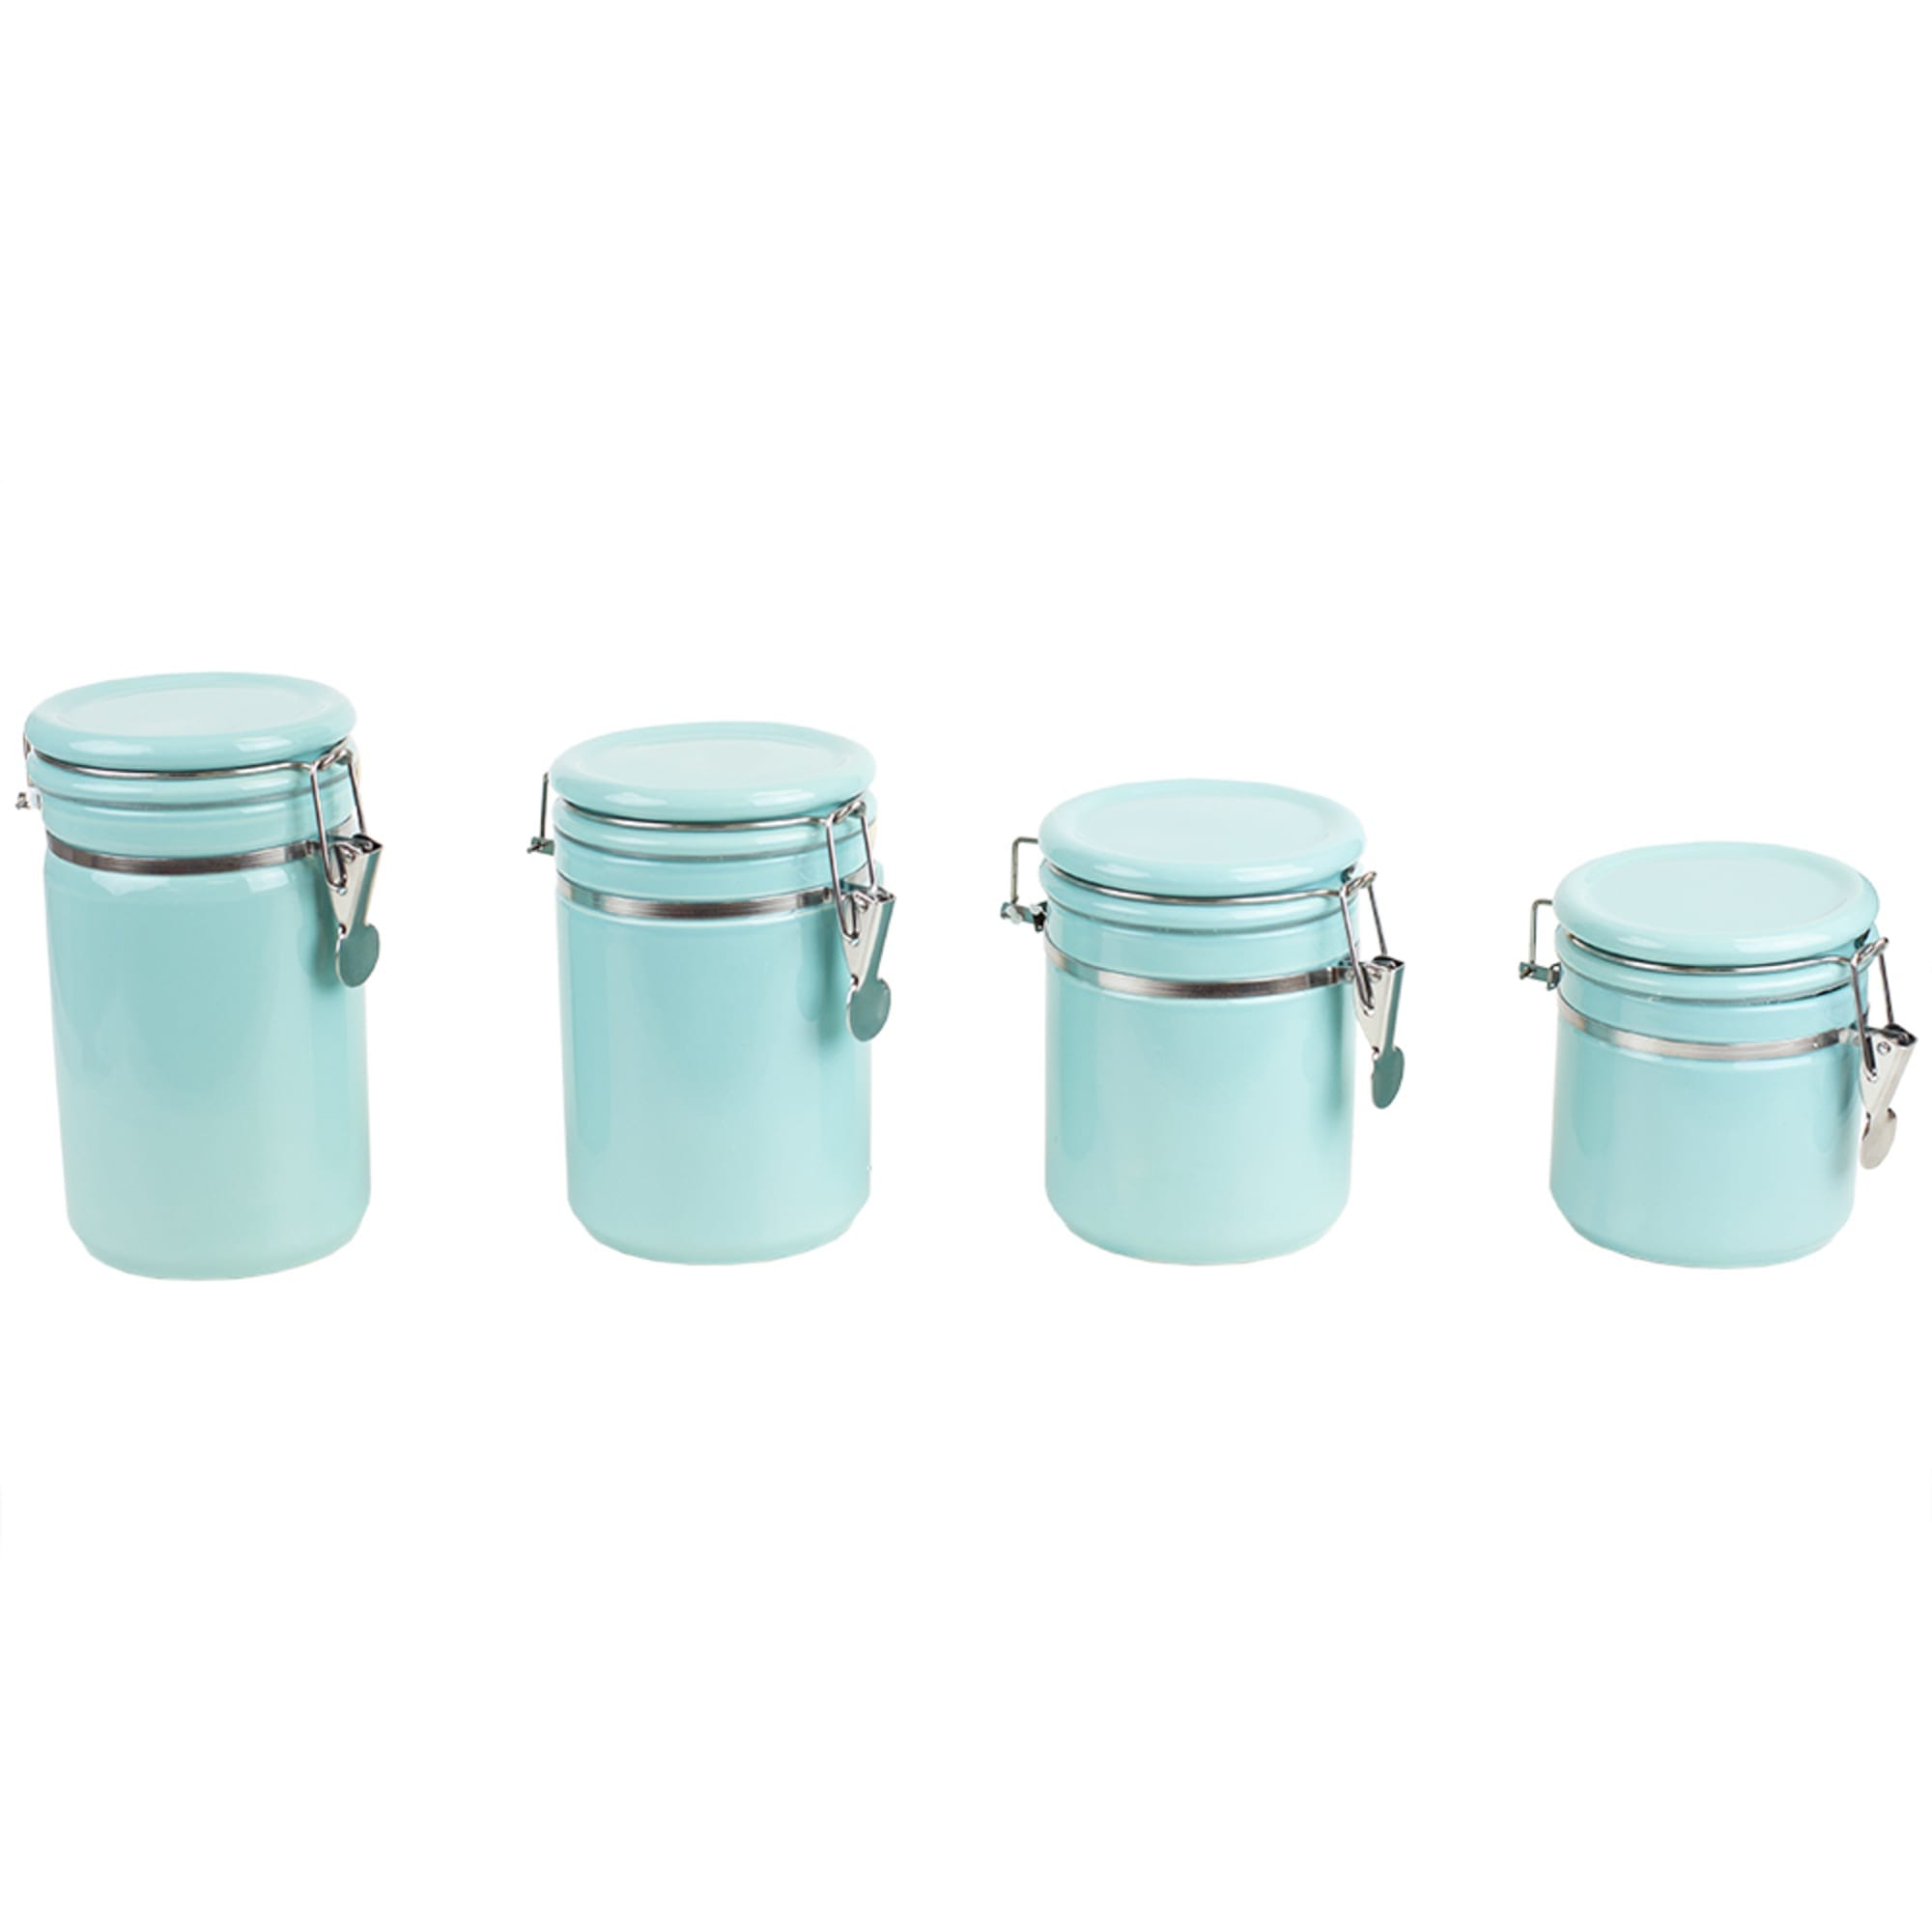 Home Basics 4 Piece Ceramic Canister Set with Wooden Spoons, Turquoise $20.00 EACH, CASE PACK OF 2